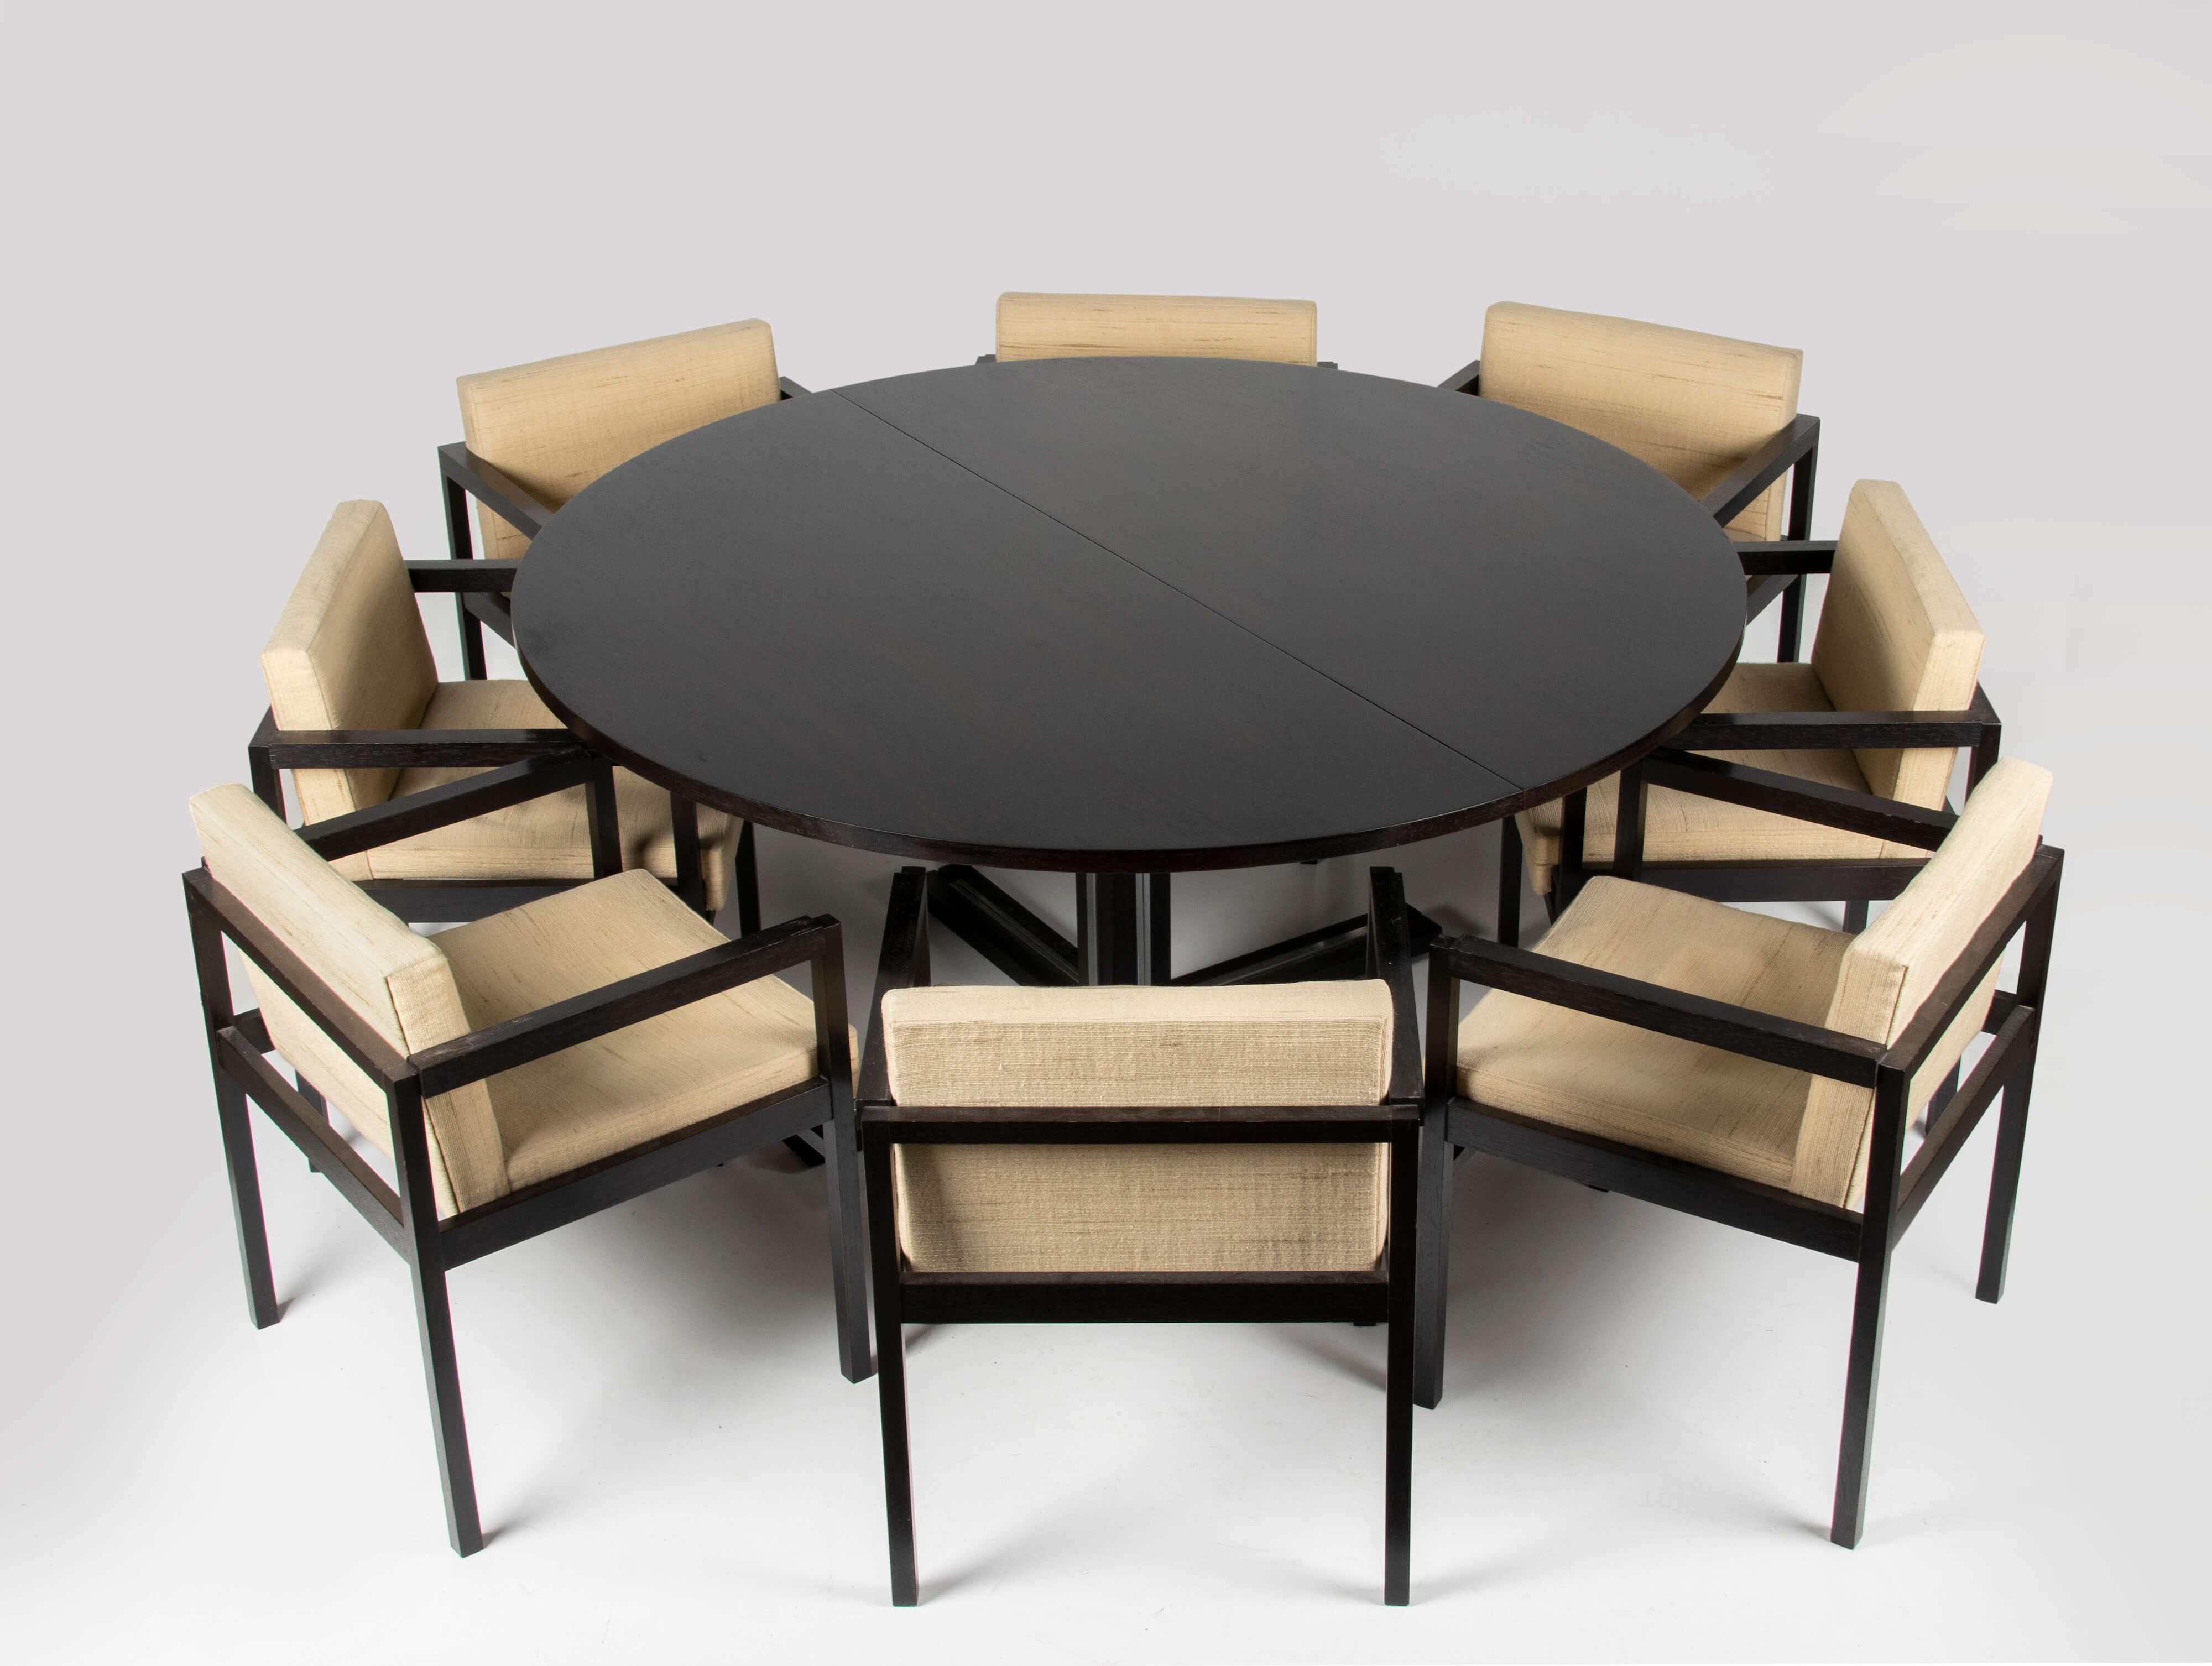 Beautiful large round wenge dining table with 8 matching chairs in the style of Jules WABBES. The table can be extended with two original leaves. If there are 6 chairs at the table, everyone is more spacious. The 8 chairs are especially useful when